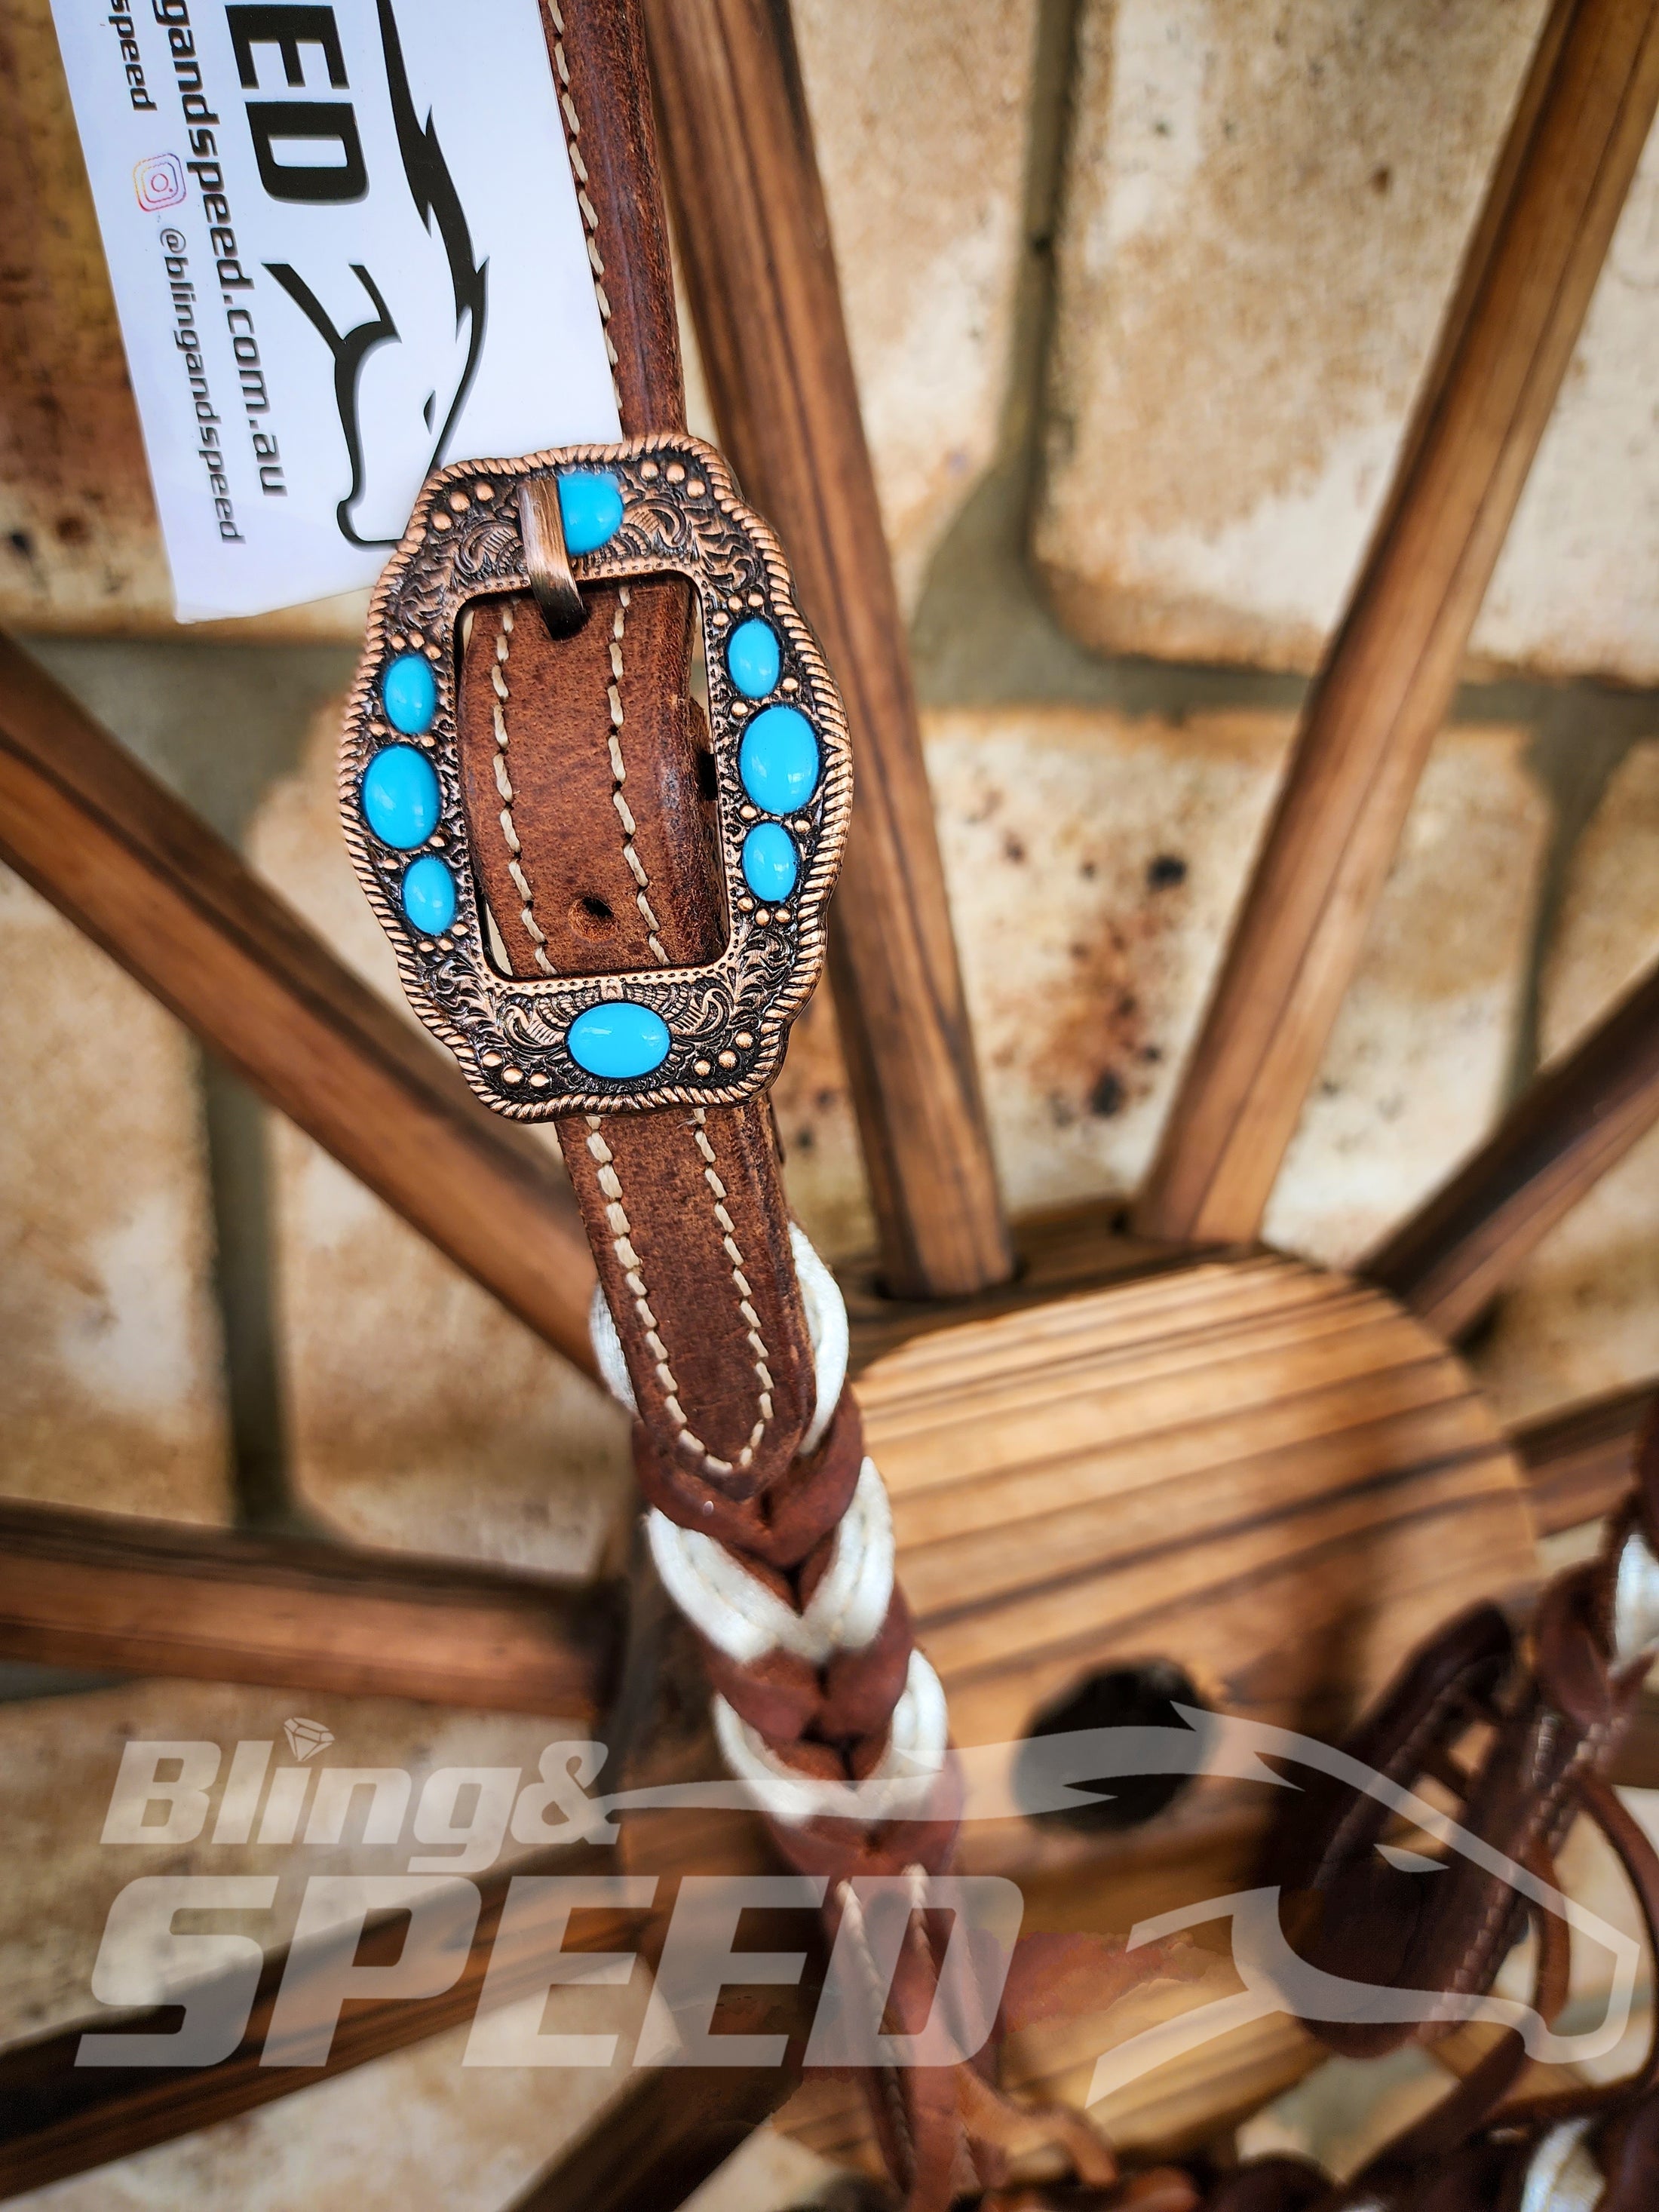 Twisted Bloodknot Bridle and Breastcollar